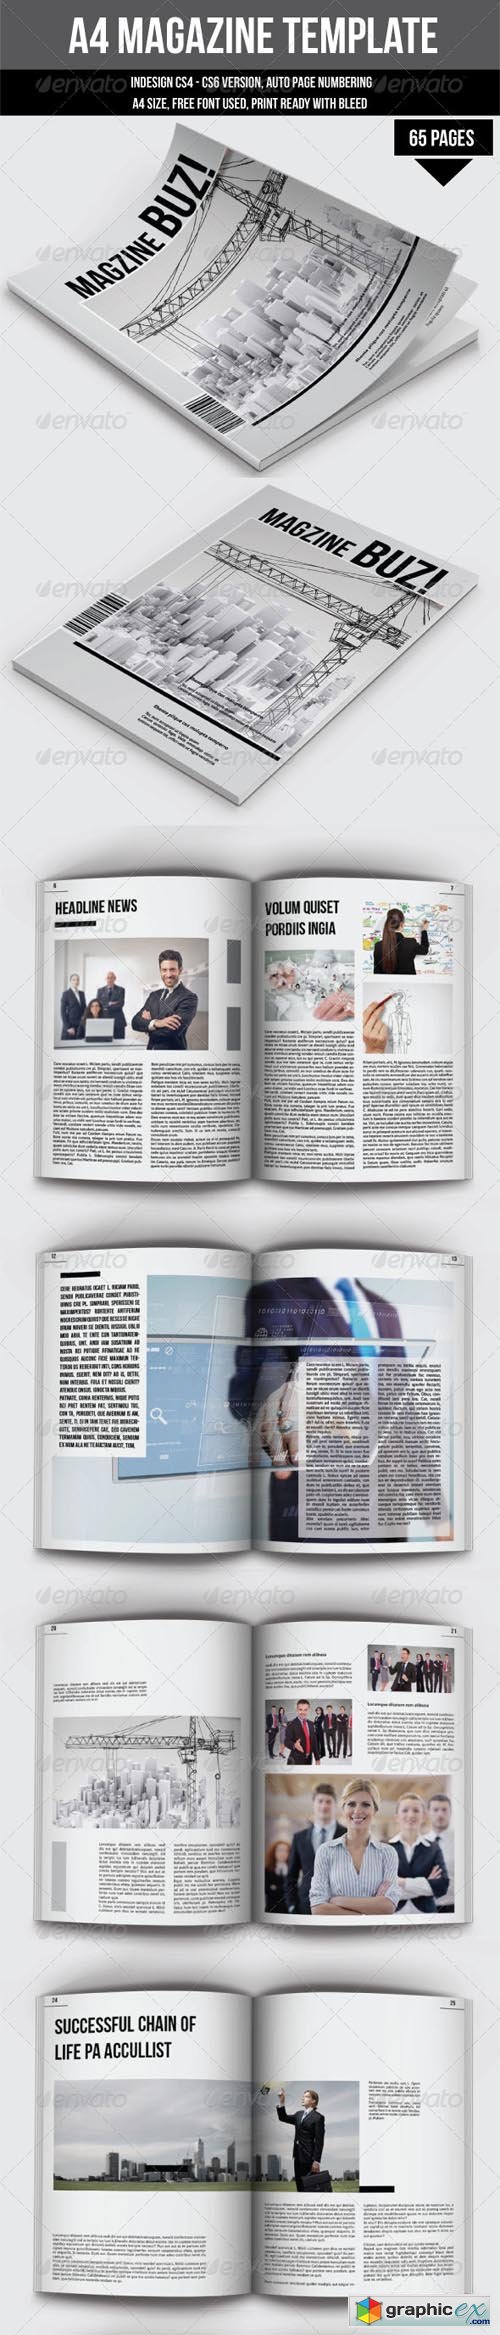 65 Pages Magazine Template